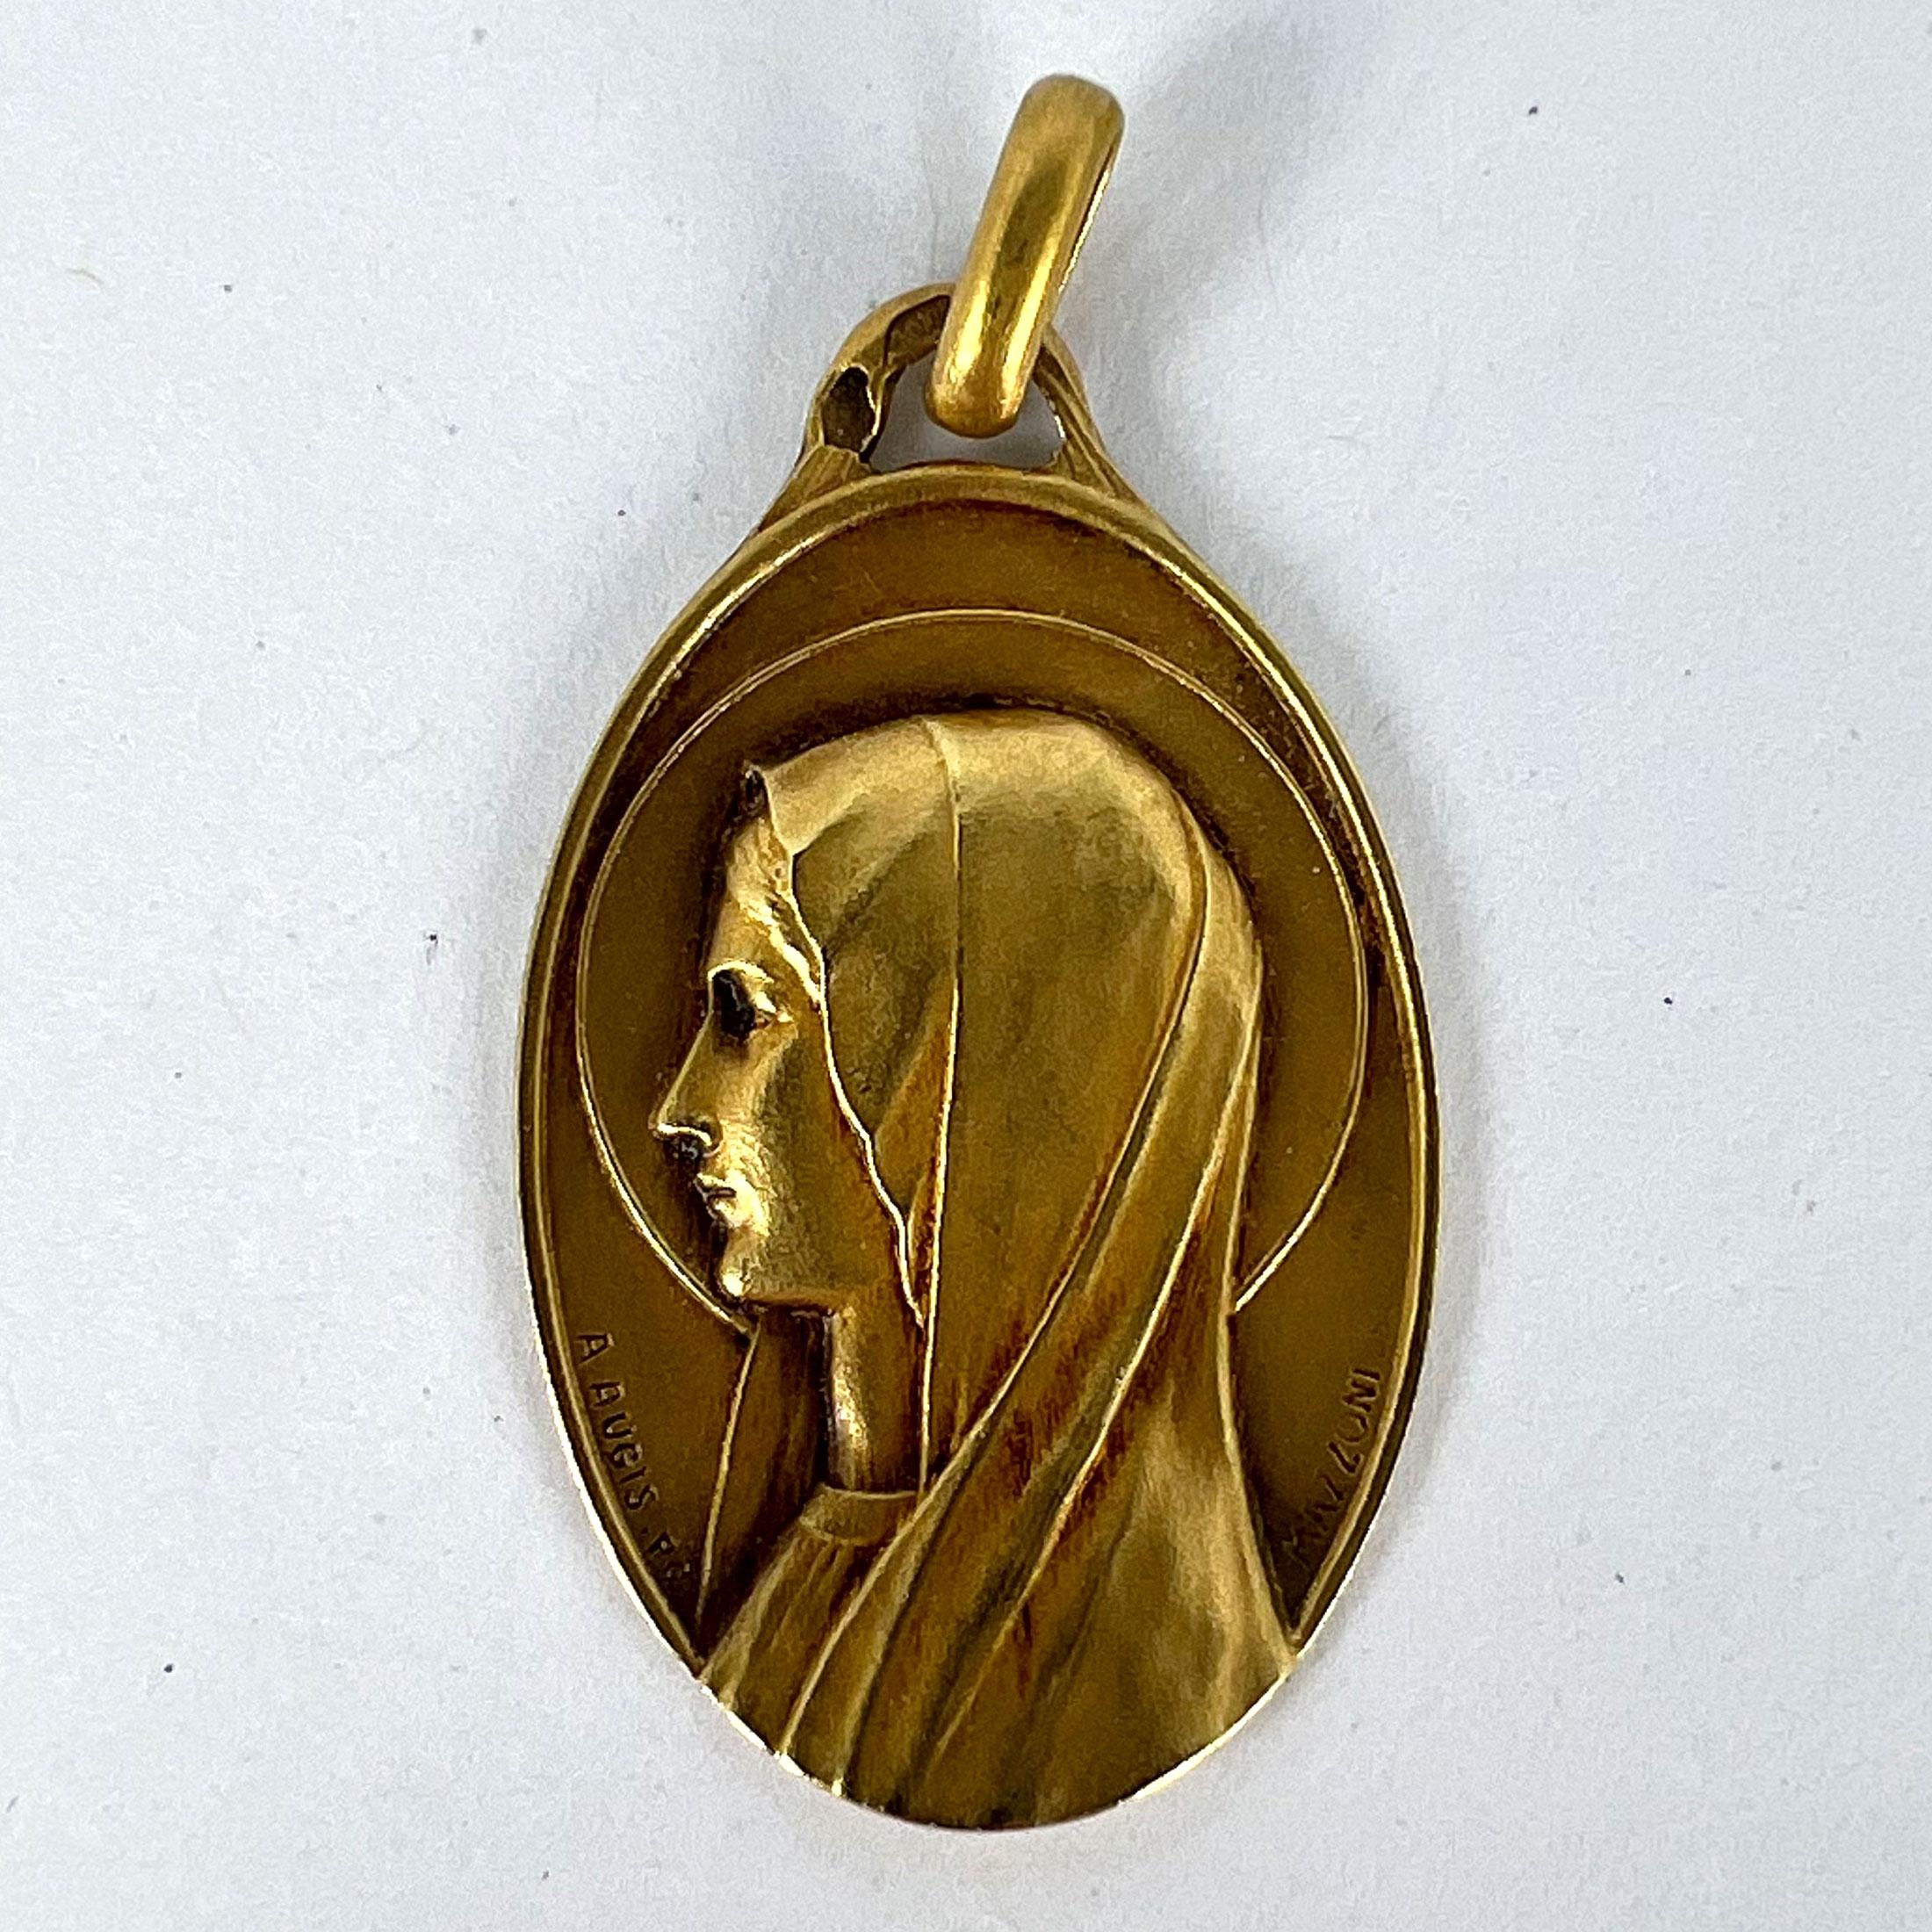 French Augis Mazzoni Virgin Mary 18K Yellow Gold Pendant For Sale 7